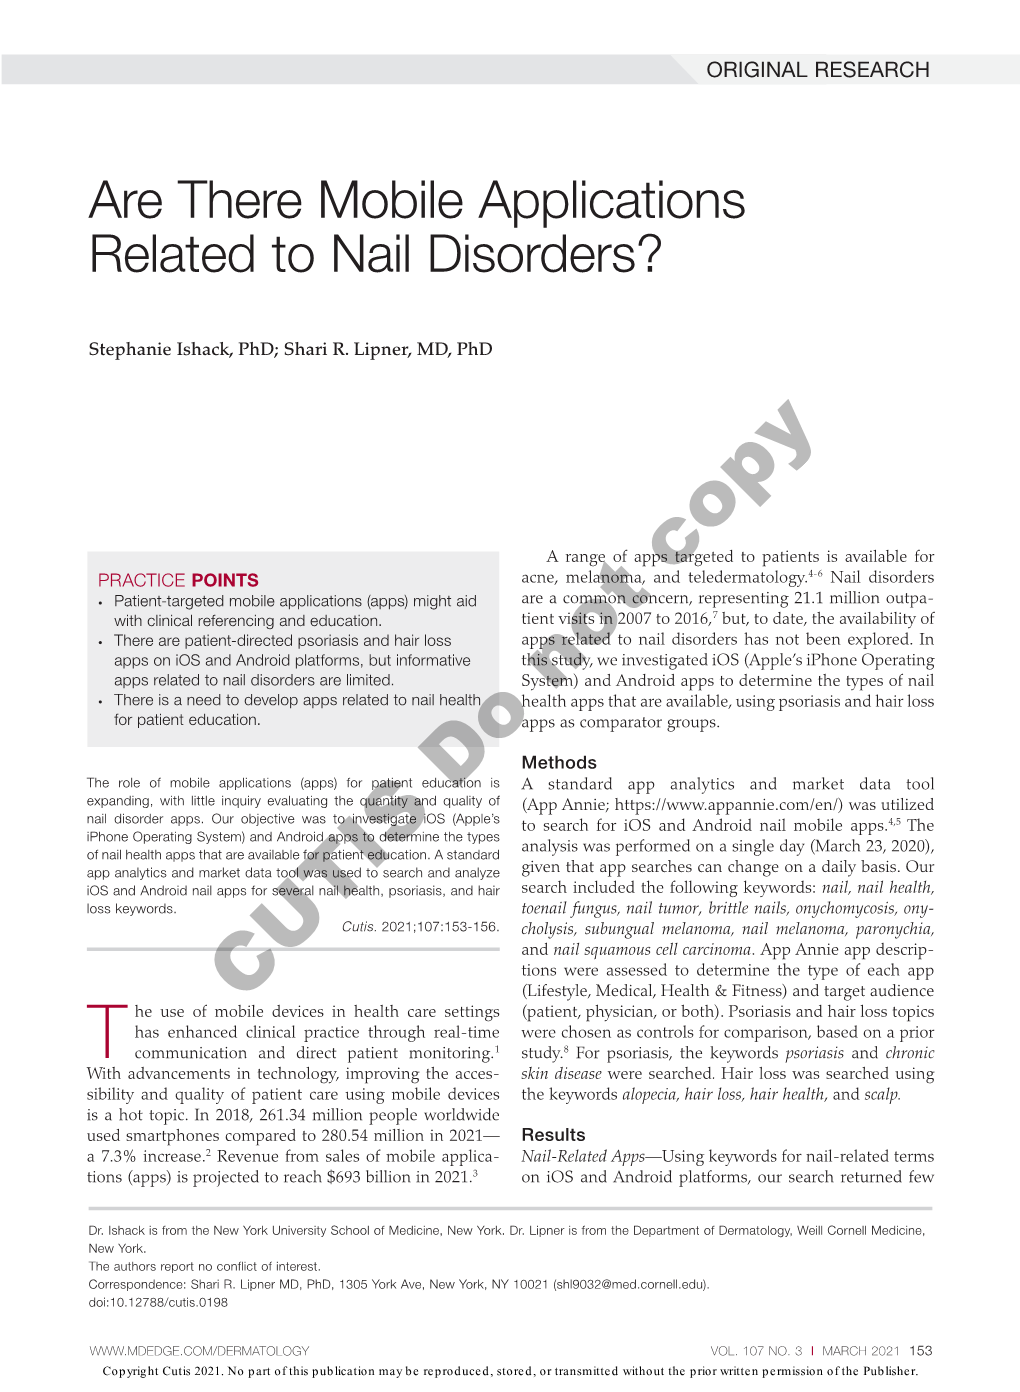 Are There Mobile Applications Related to Nail Disorders?